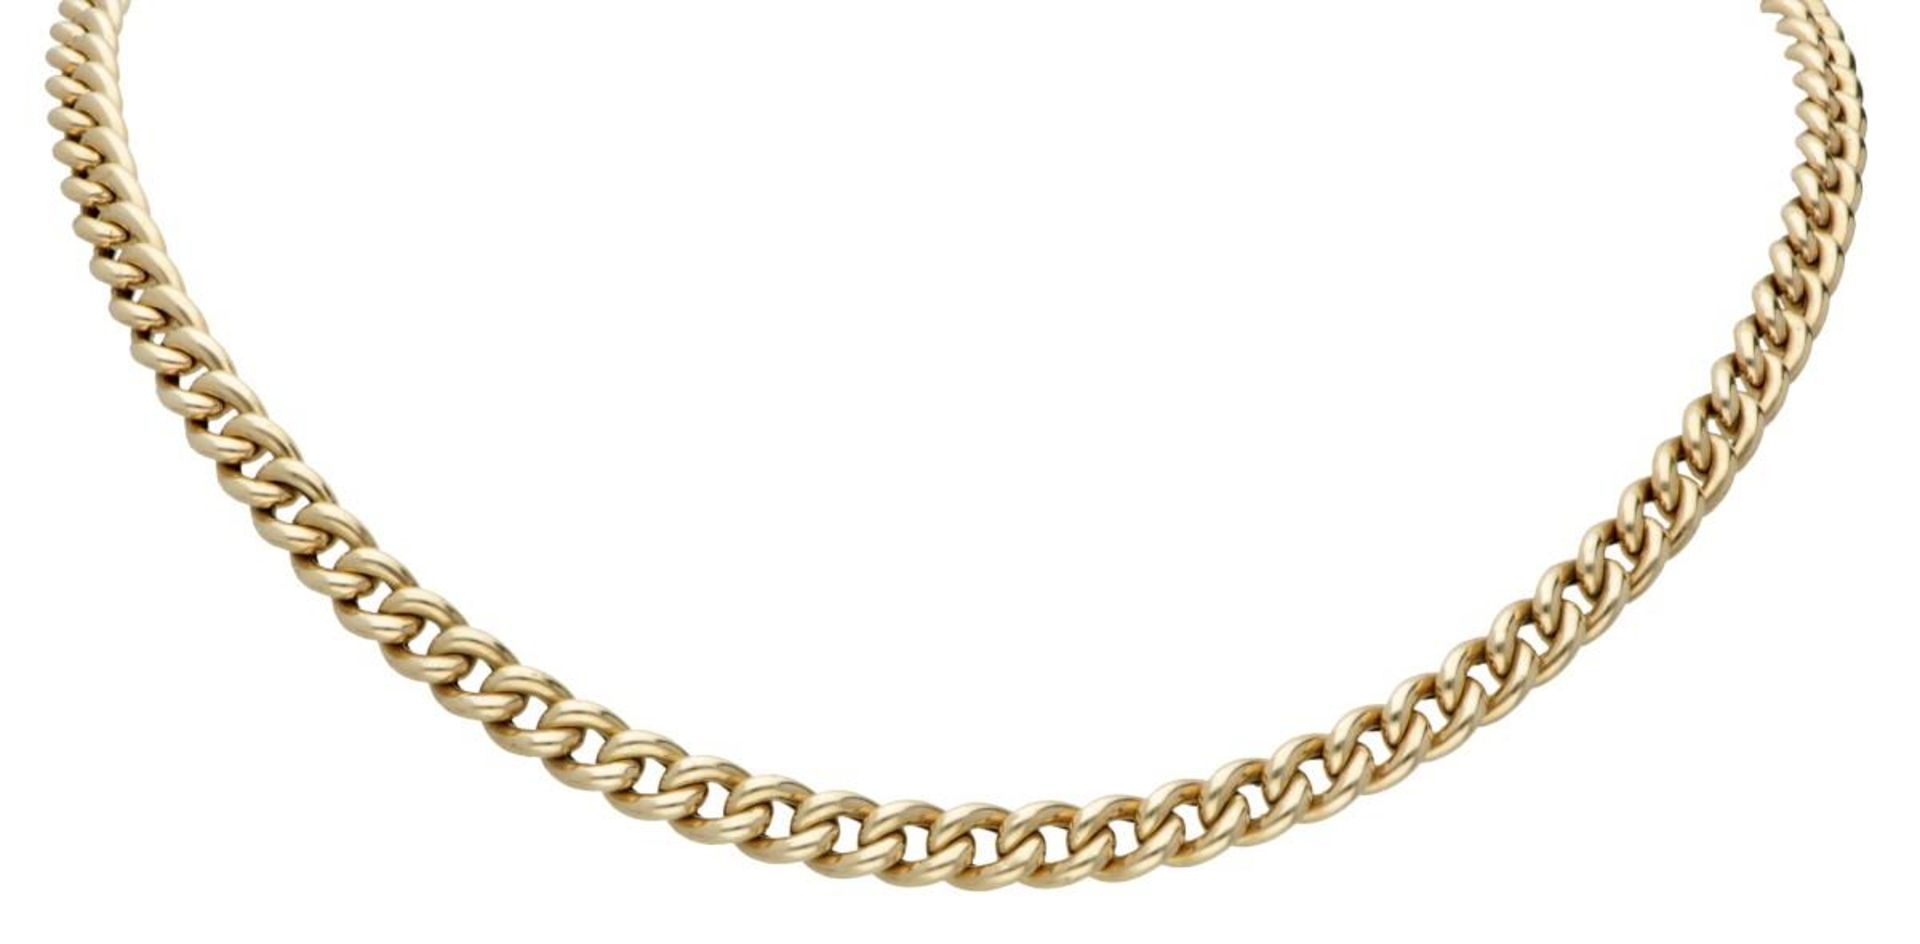 14K. Yellow gold gourmet link necklace.